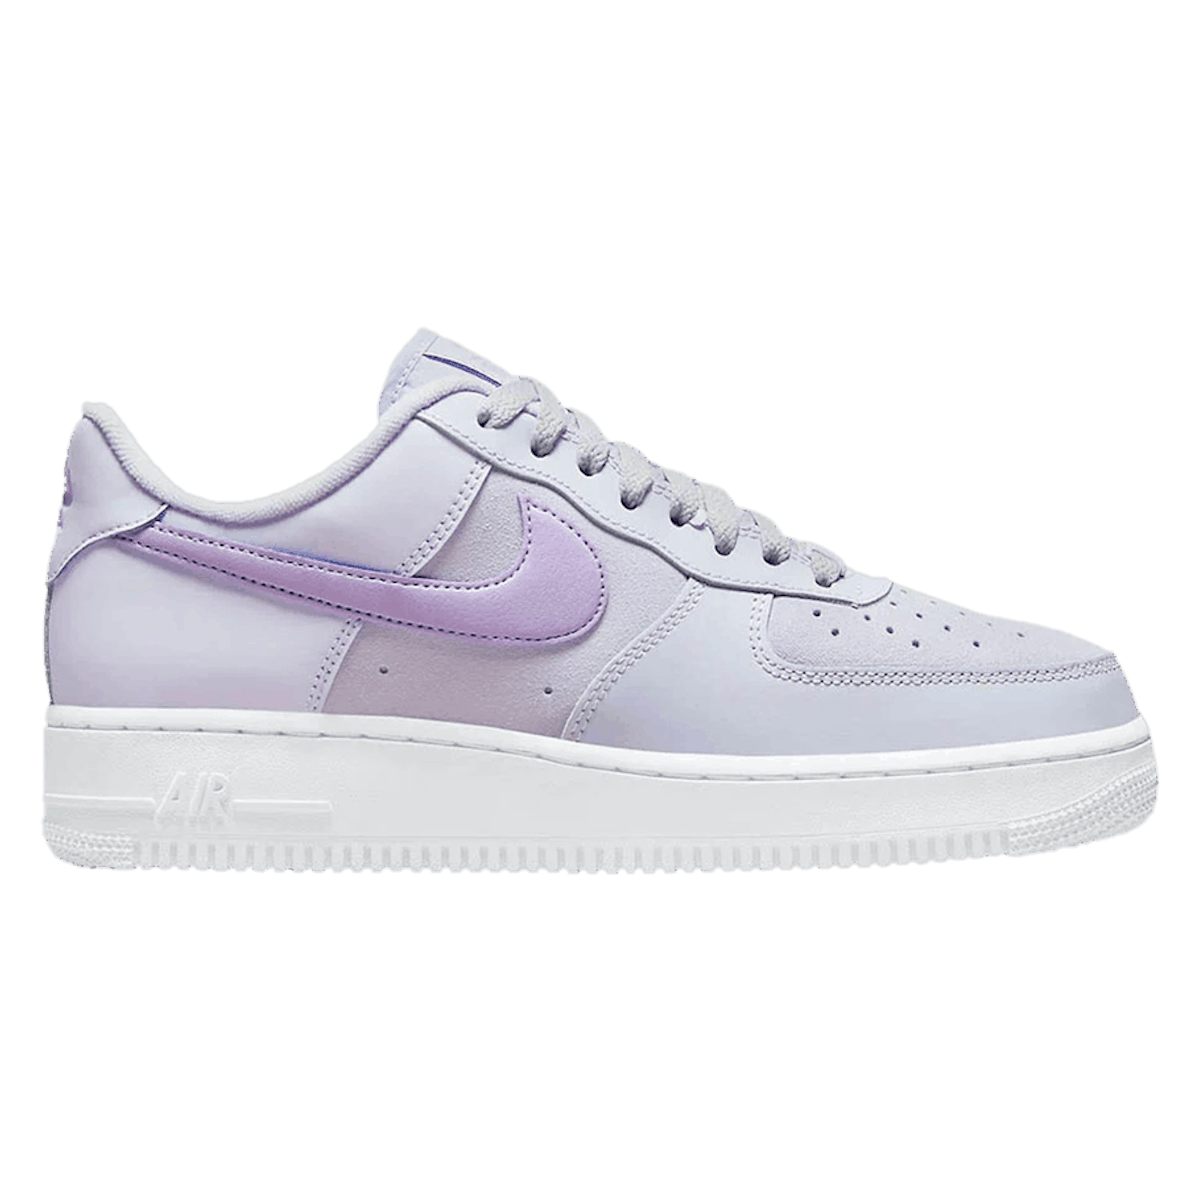 Nike Air Force 1 '07 Essential "Pure Violet"